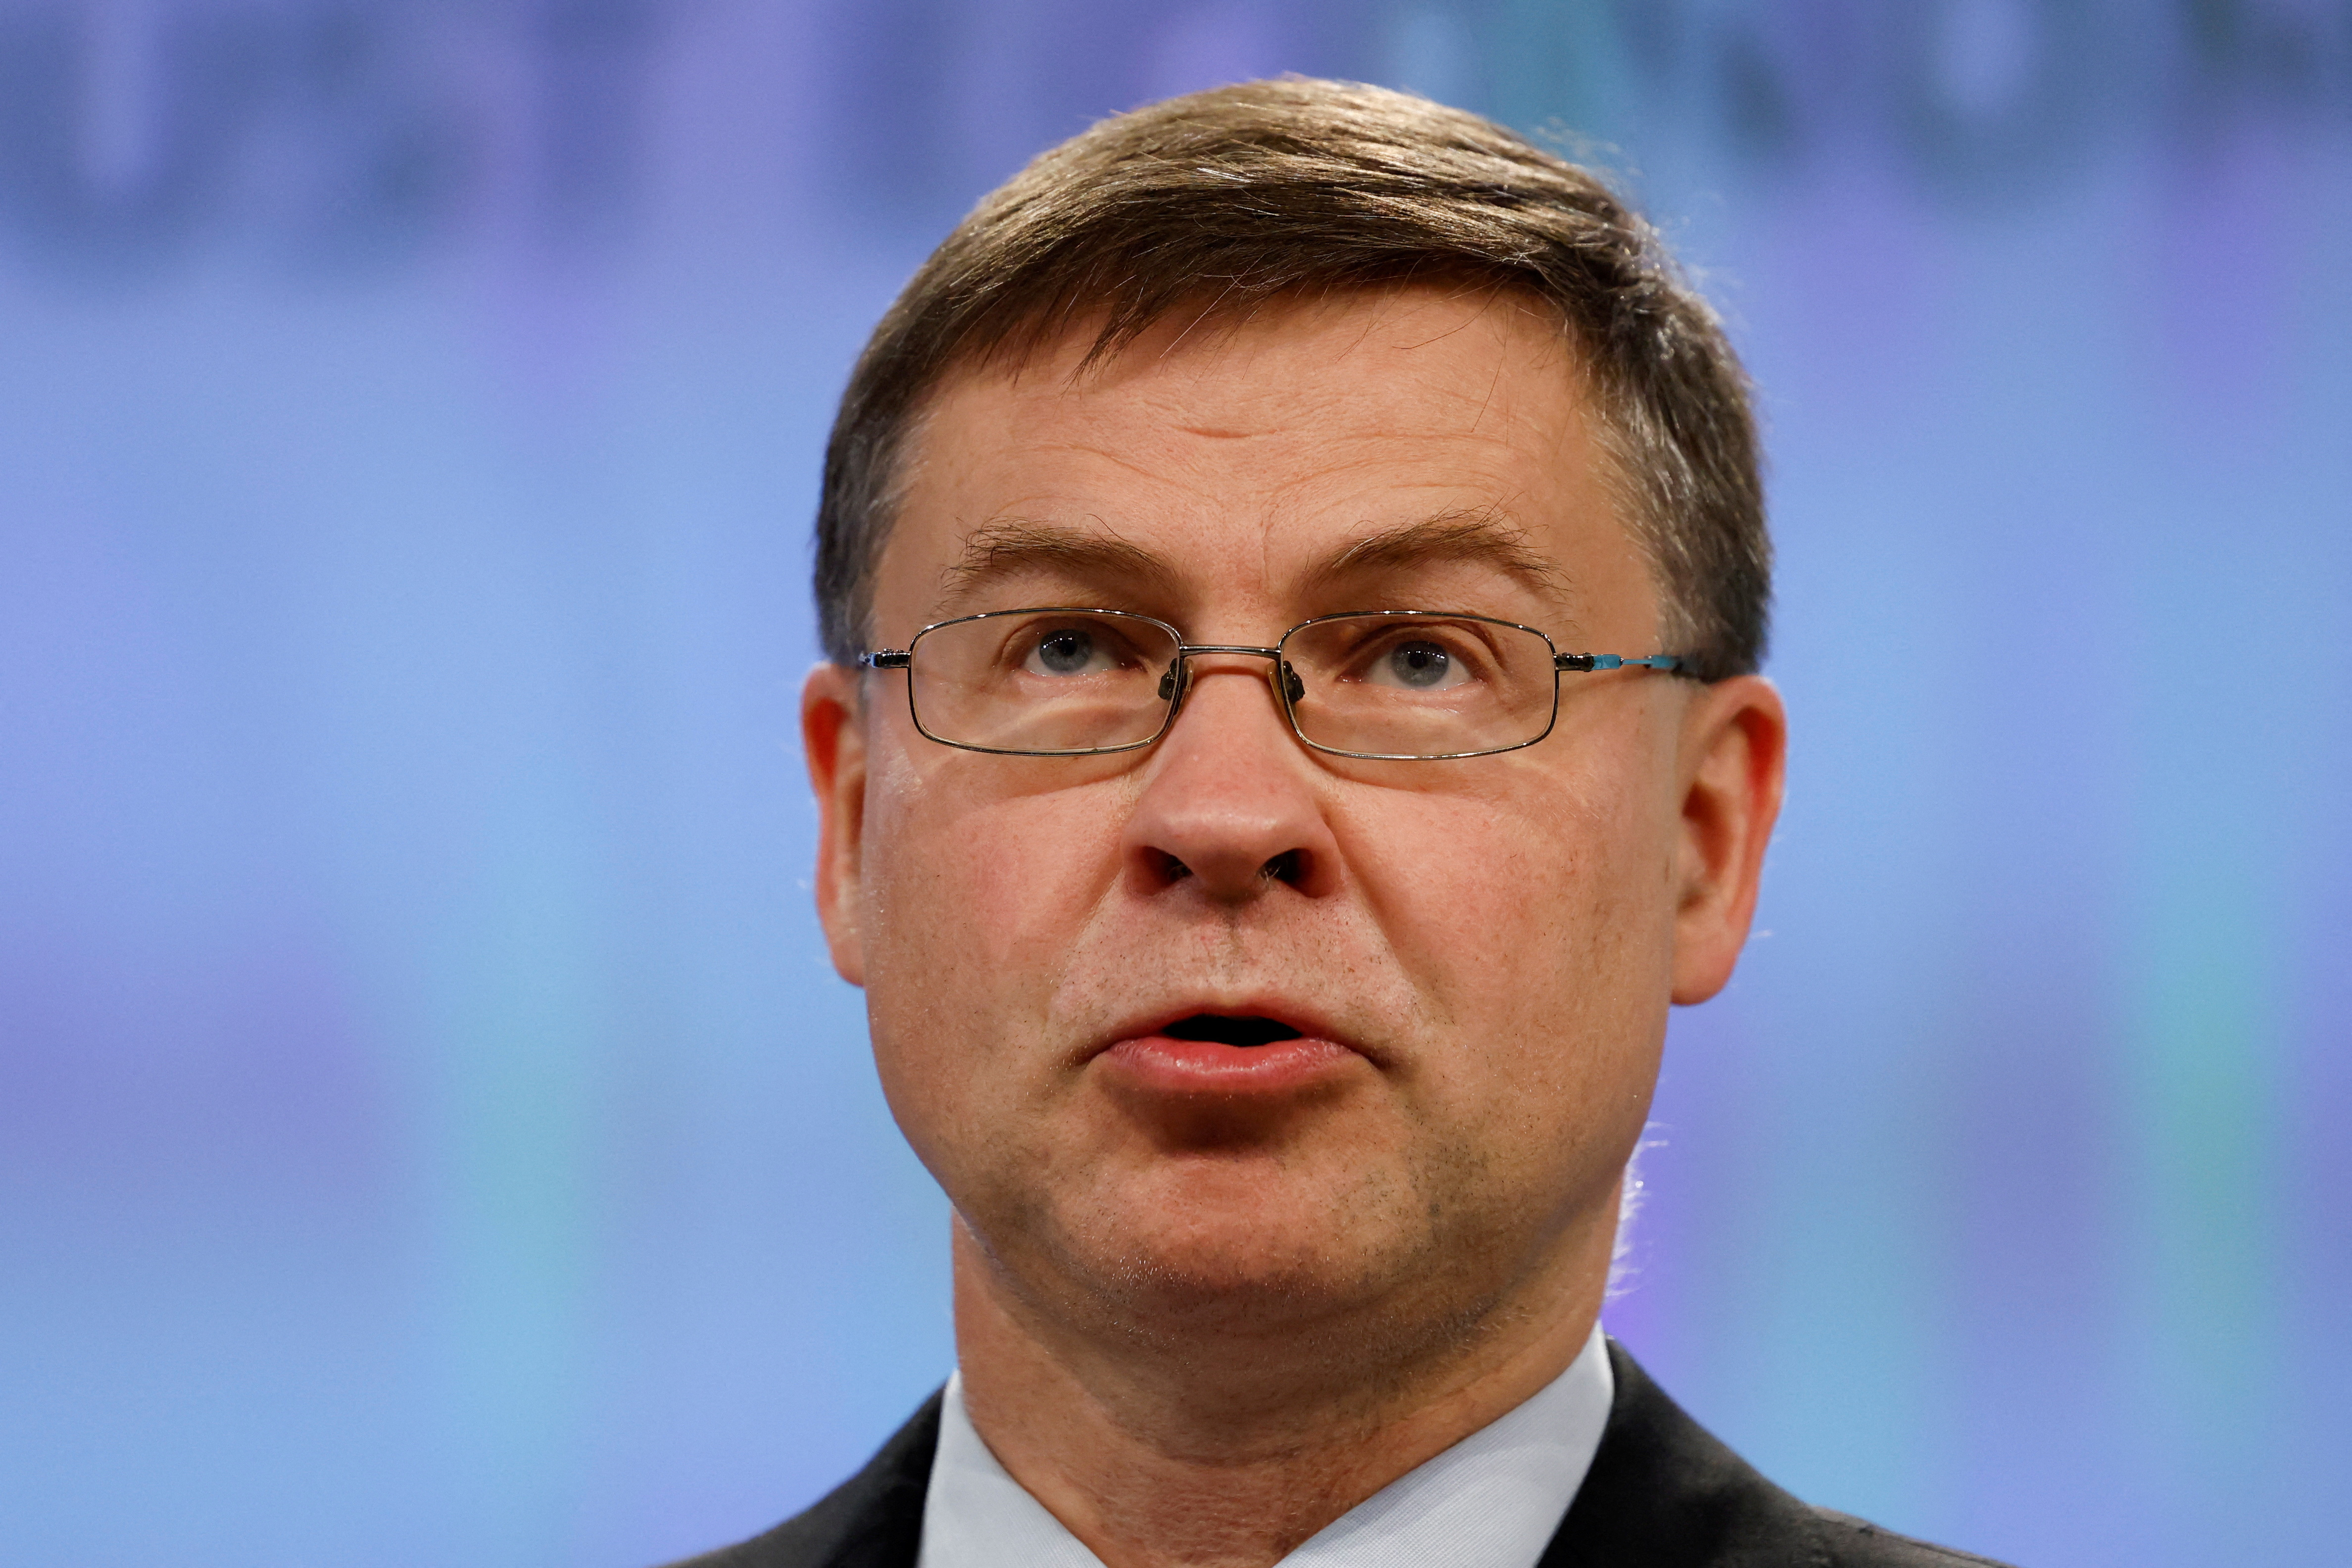 EU Trade Commissioner Dombrovskis presents a review of trade and sustainable development, in Brussels